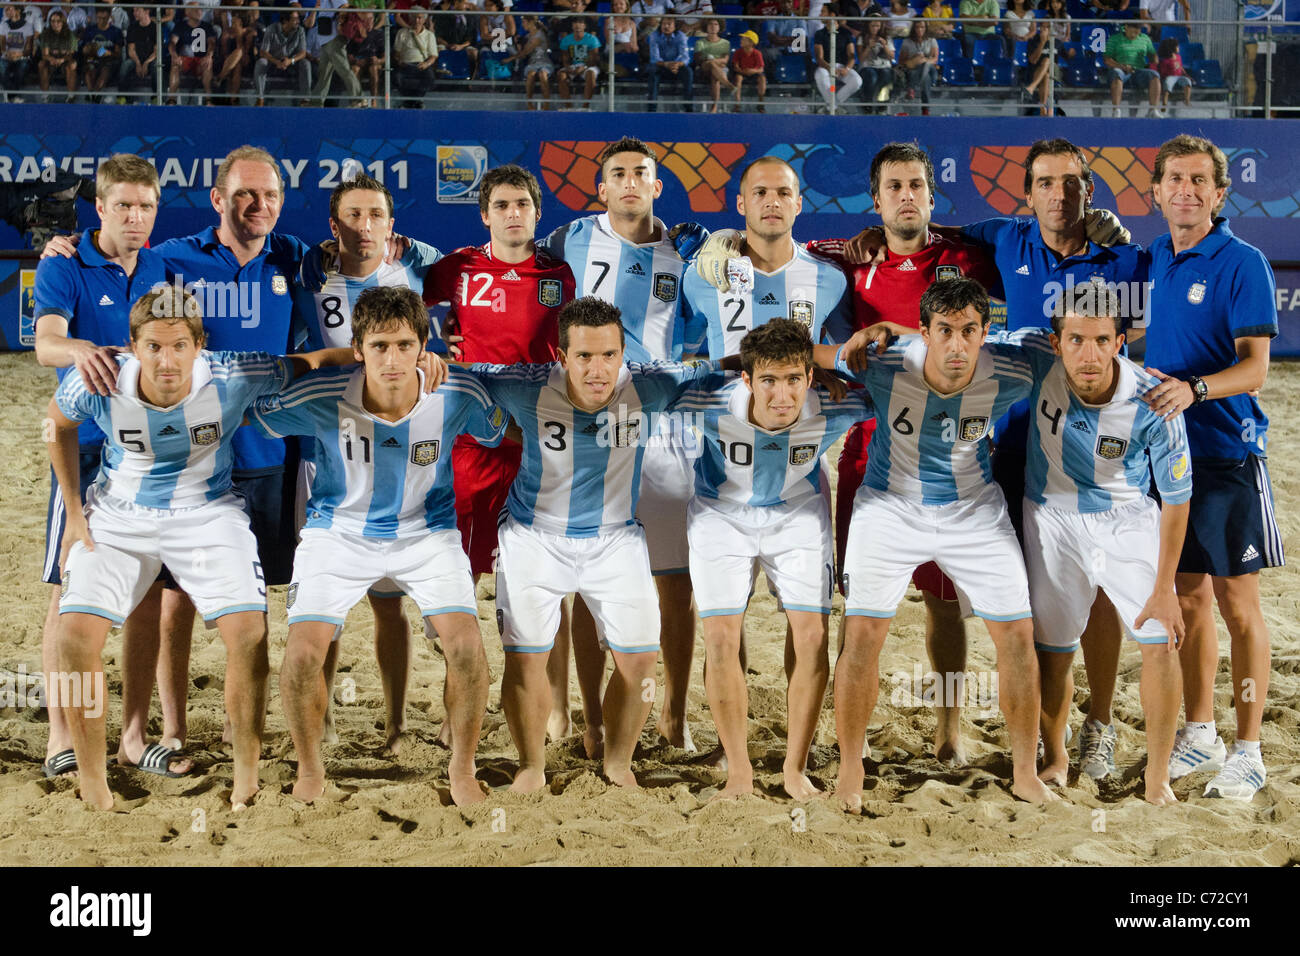 AFA's competitions begin in Argentina – Beach Soccer Worldwide